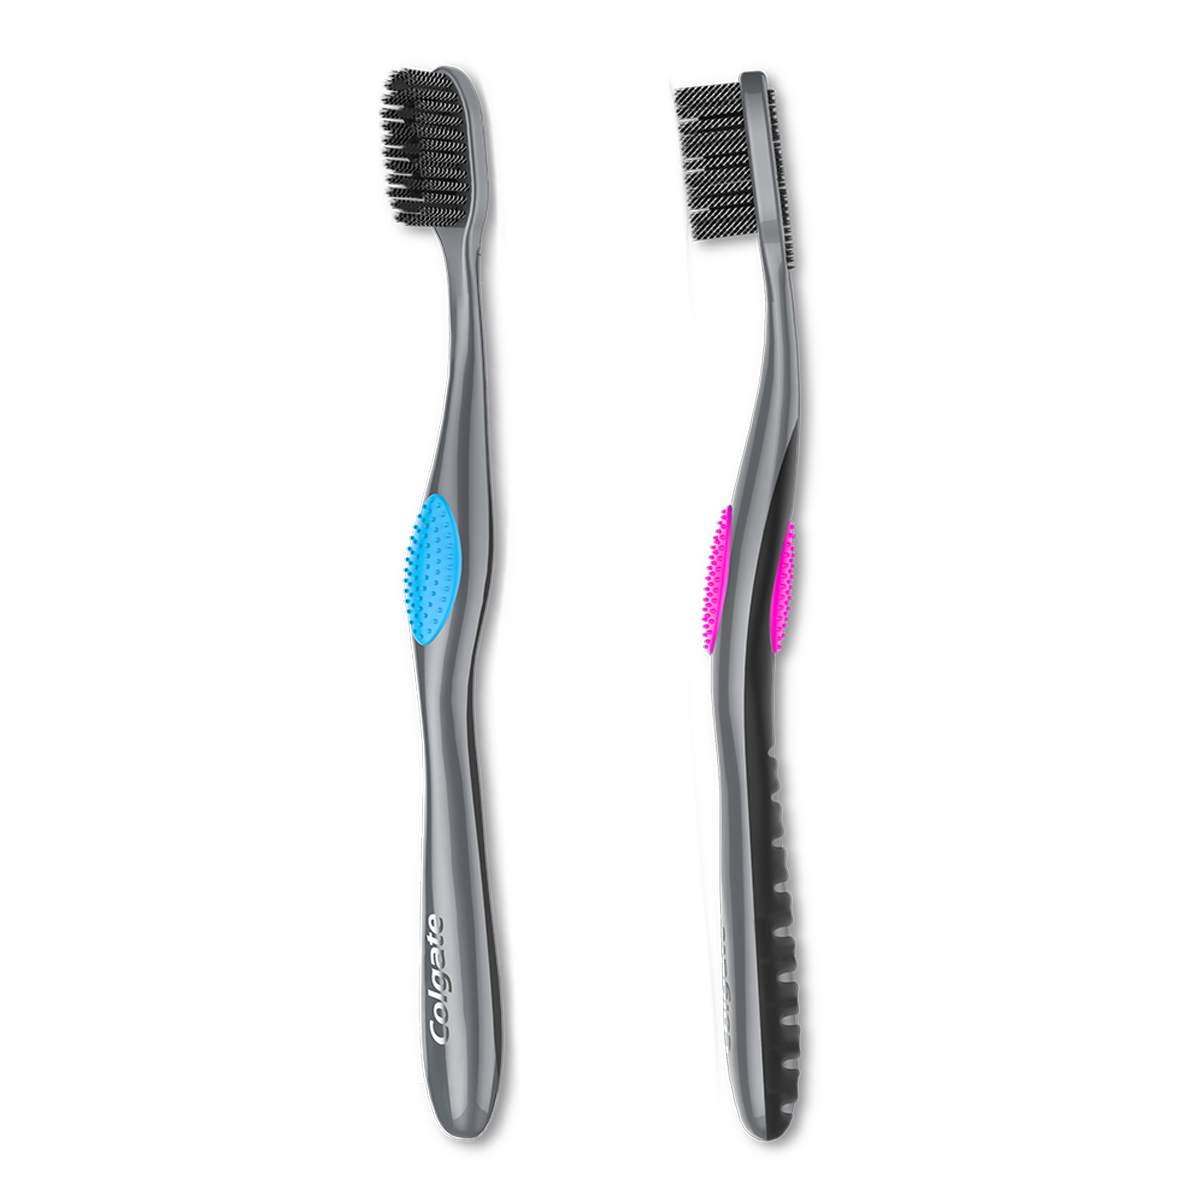 2-Pack Colgate 360 Antibacterial Toothbrush with Soft Rubber Grip Handle and Ergonomic Design